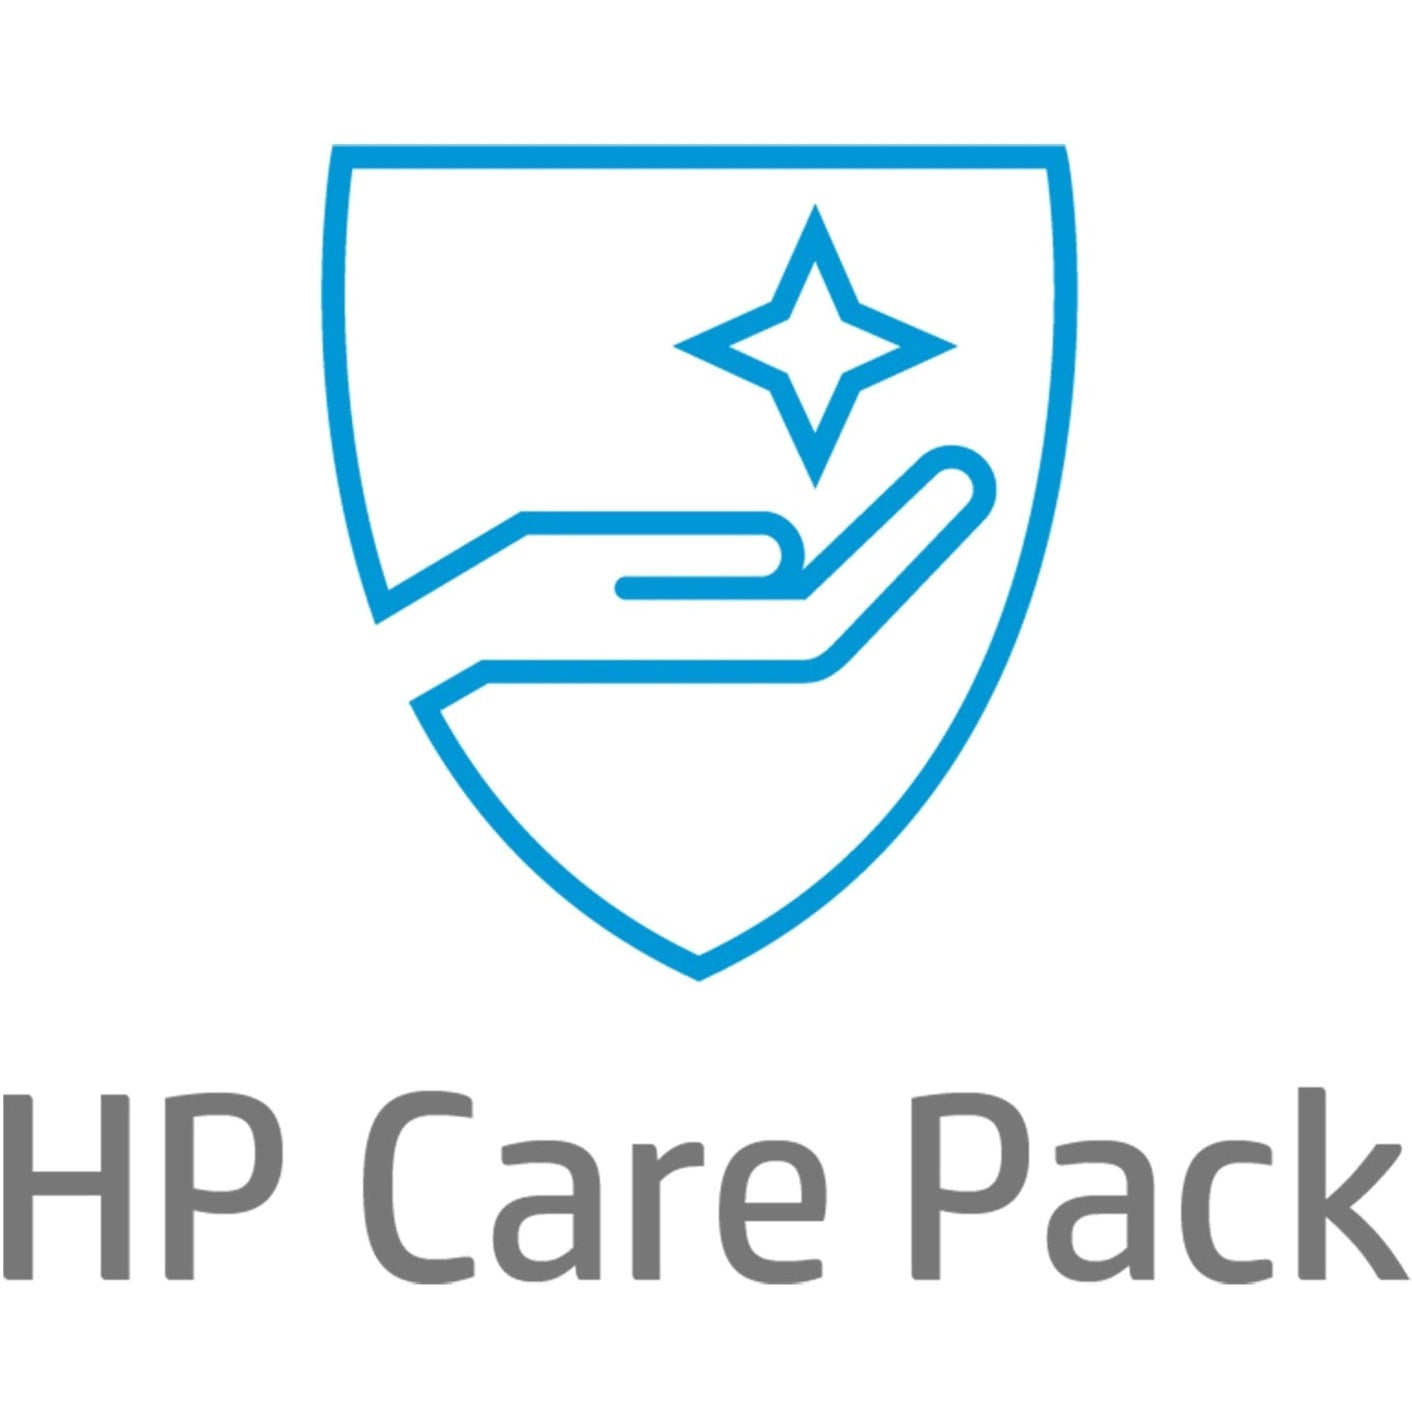 HP Care Pack Hardware Support with Defective Media Retention - Post Warranty - 1 Year - Warranty (UB7A4PE)